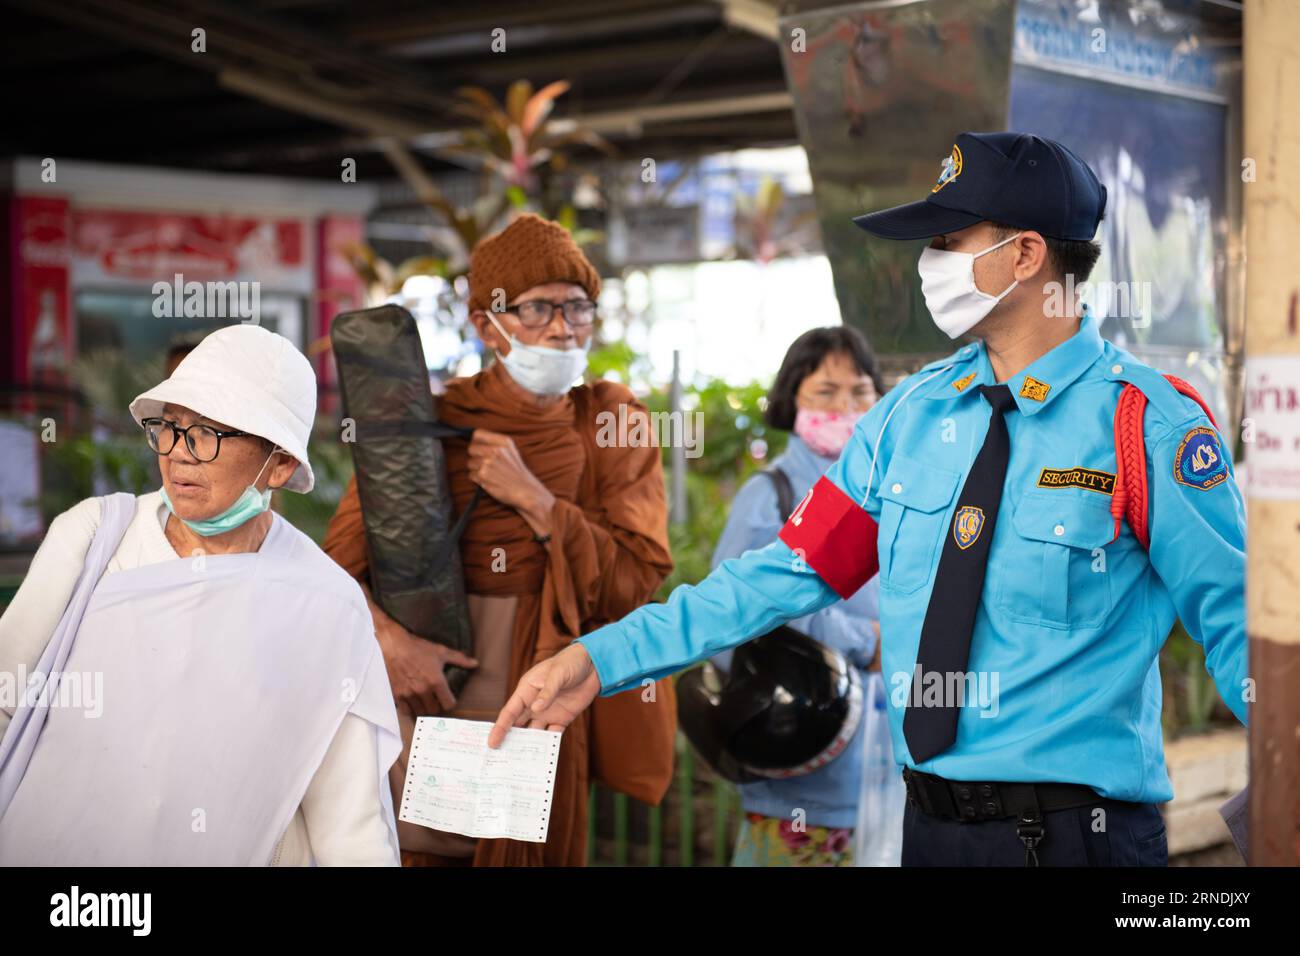 In this focused shot, a platform attendant holds a ticket while assisting a passenger at Bangkok's Hua Lamphong Railway Station. Stock Photo